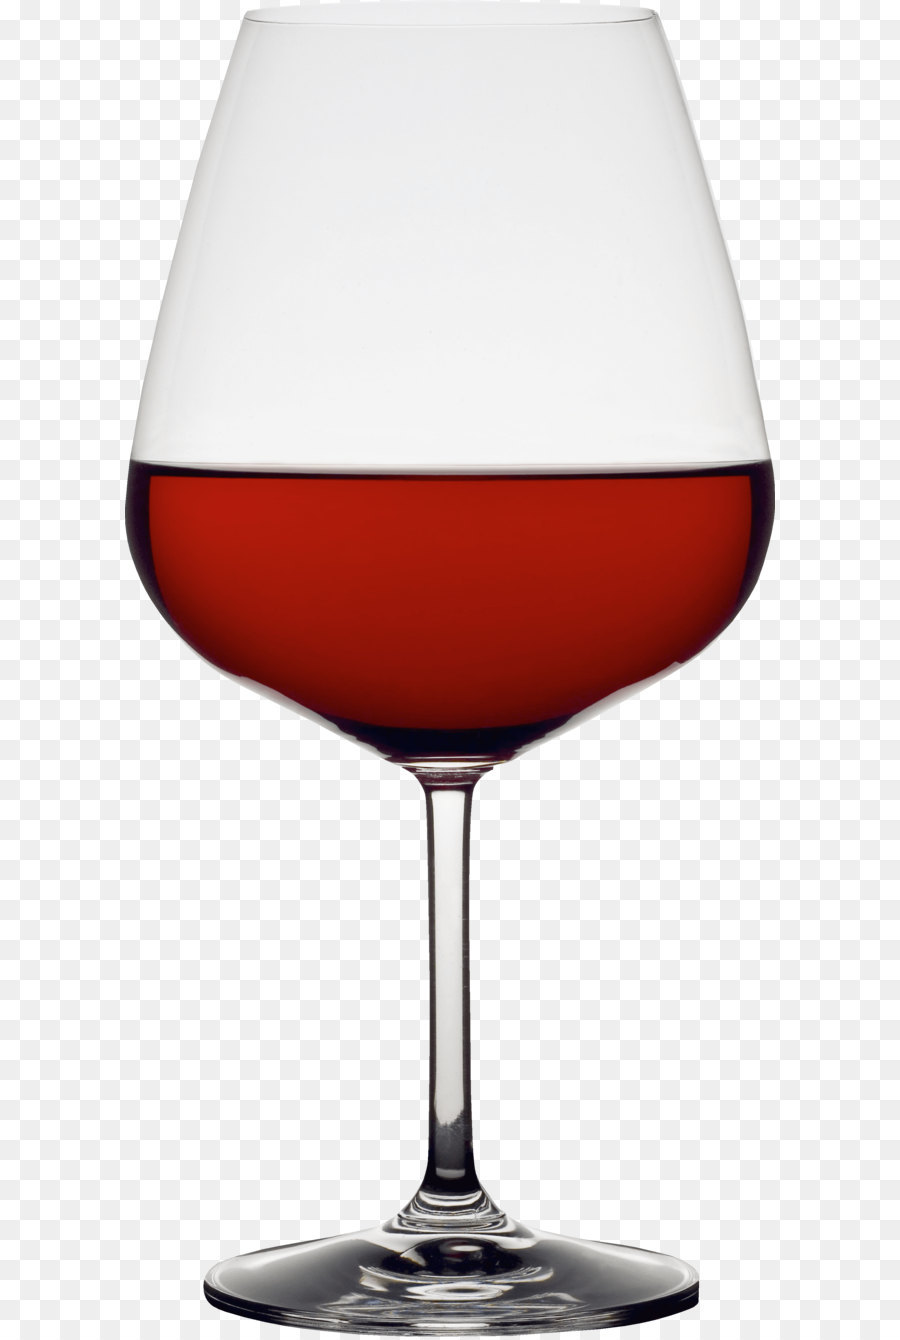 Red Wine Sparkling wine Wine glass Drink - Glass Png Image png download - 2287*4703 - Free Transparent Red Wine png Download.